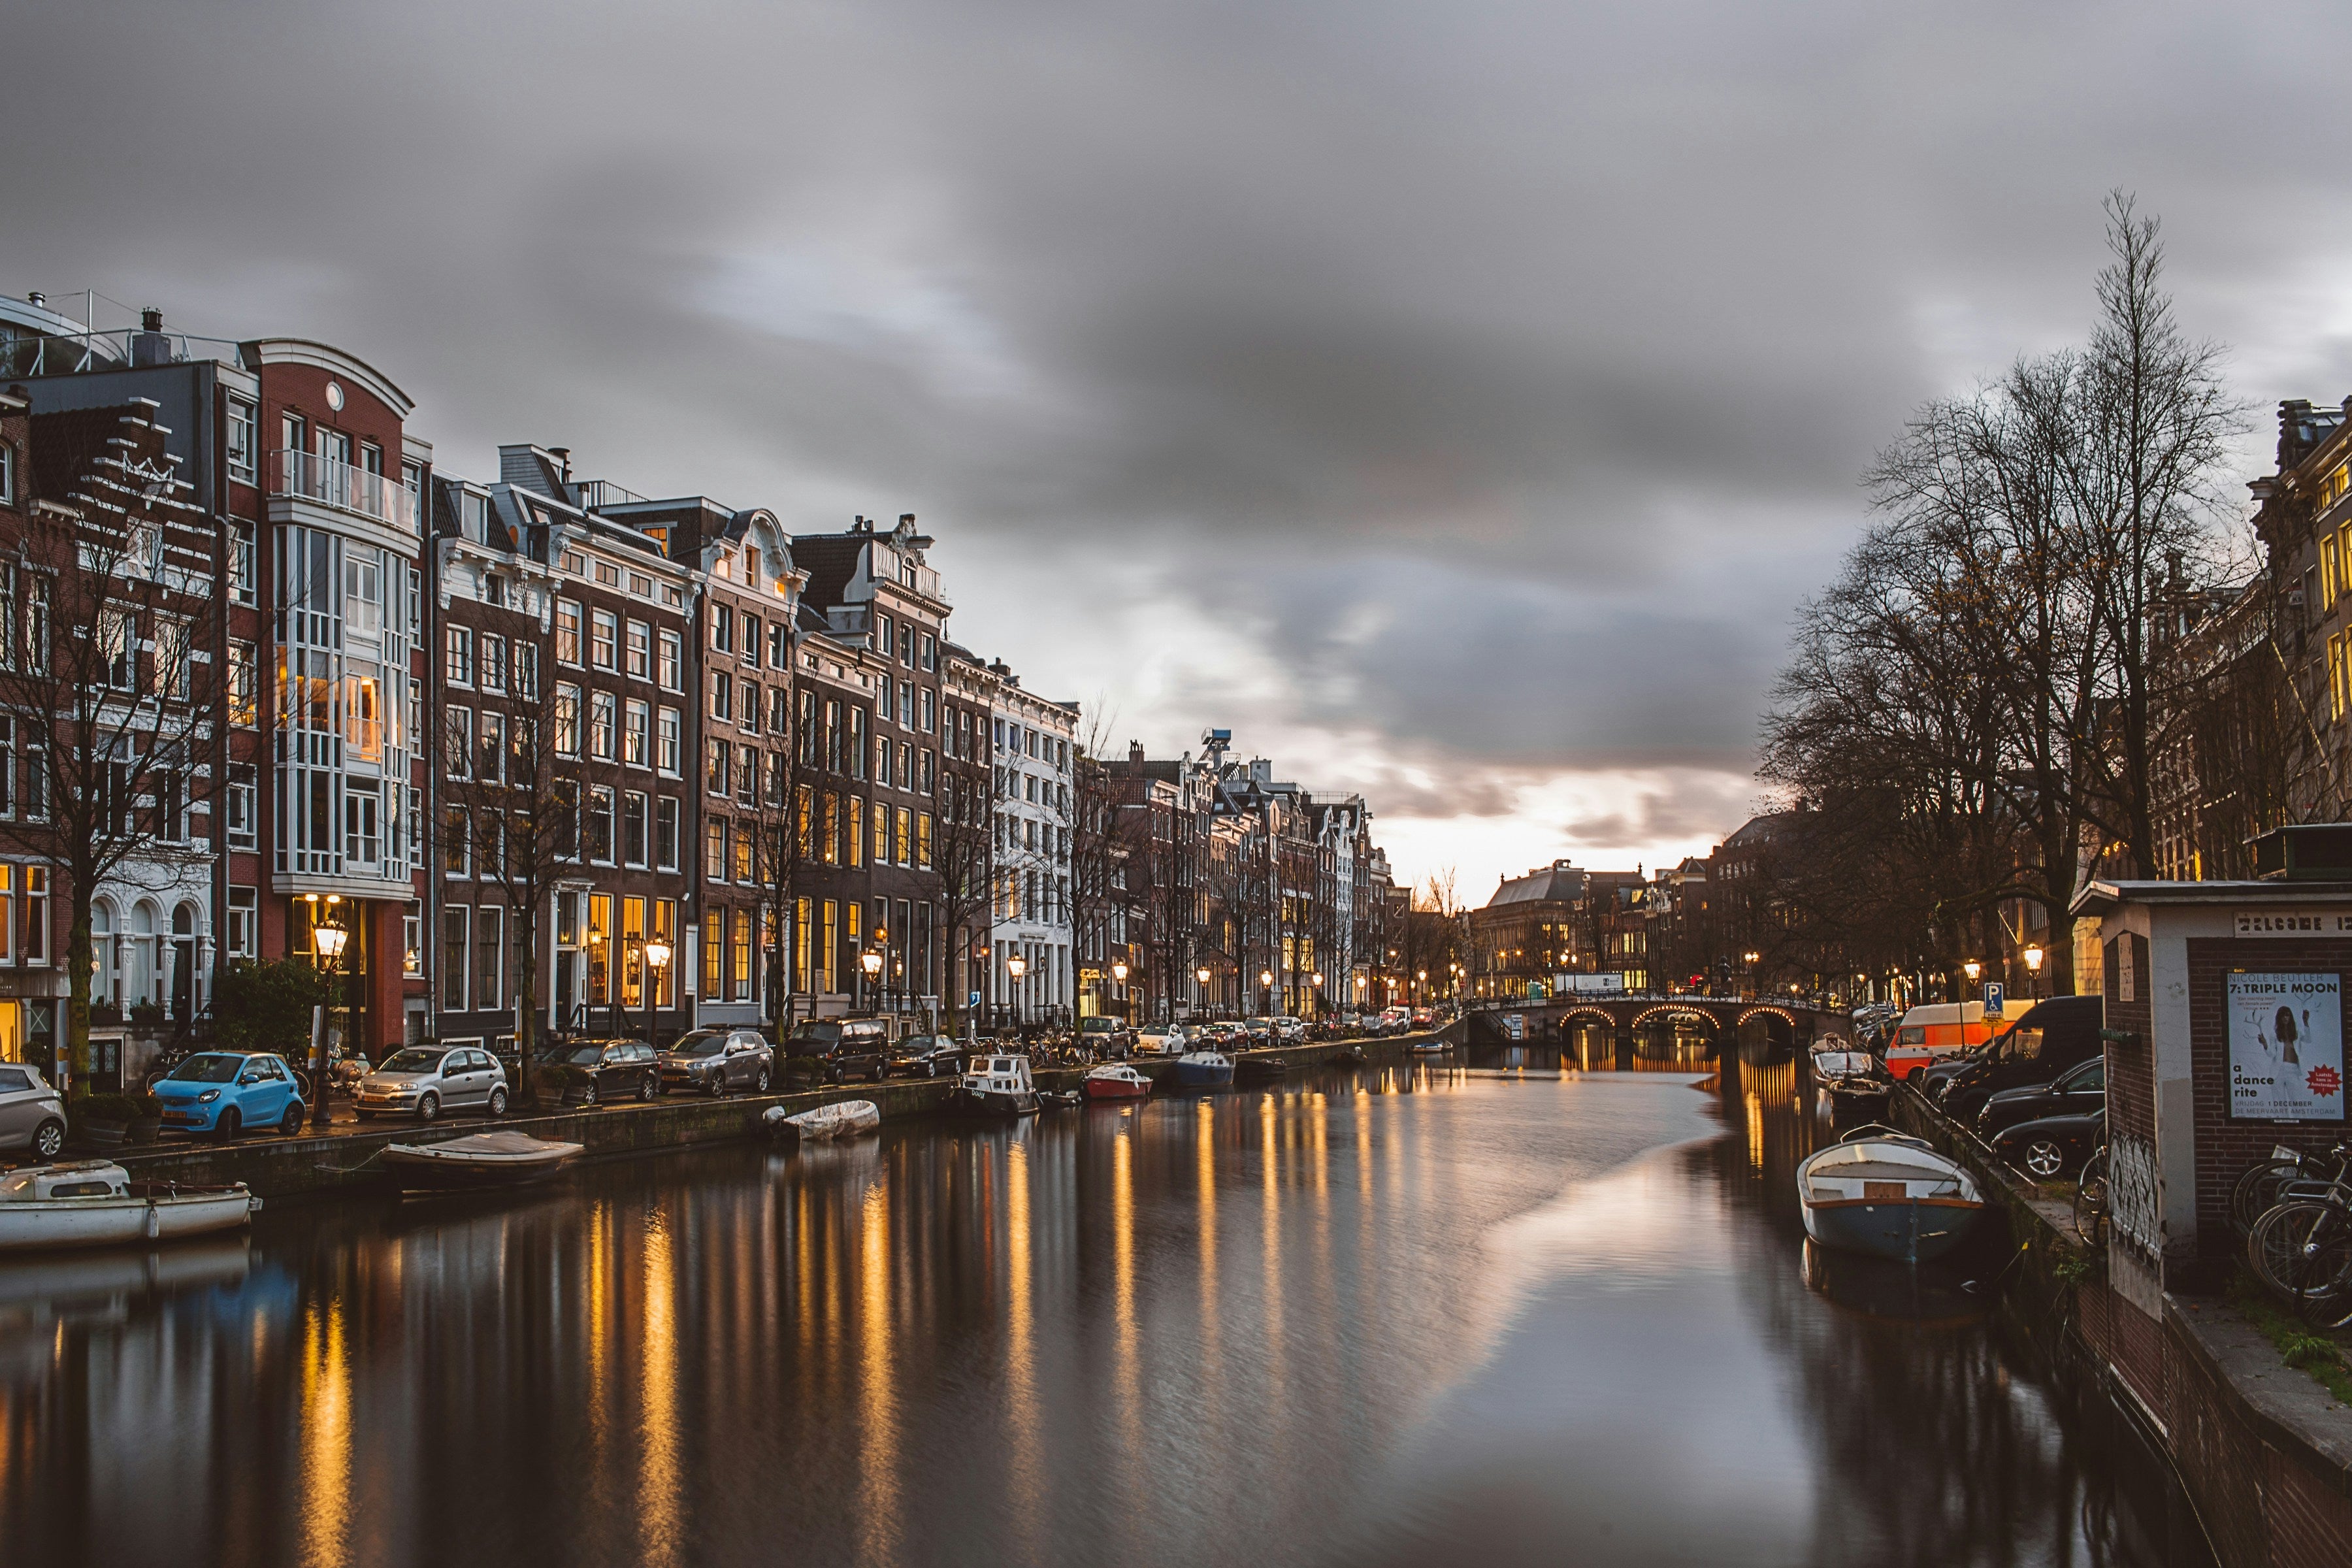 Strolling Amsterdam’s canals is a wonderful way to while away a weekend